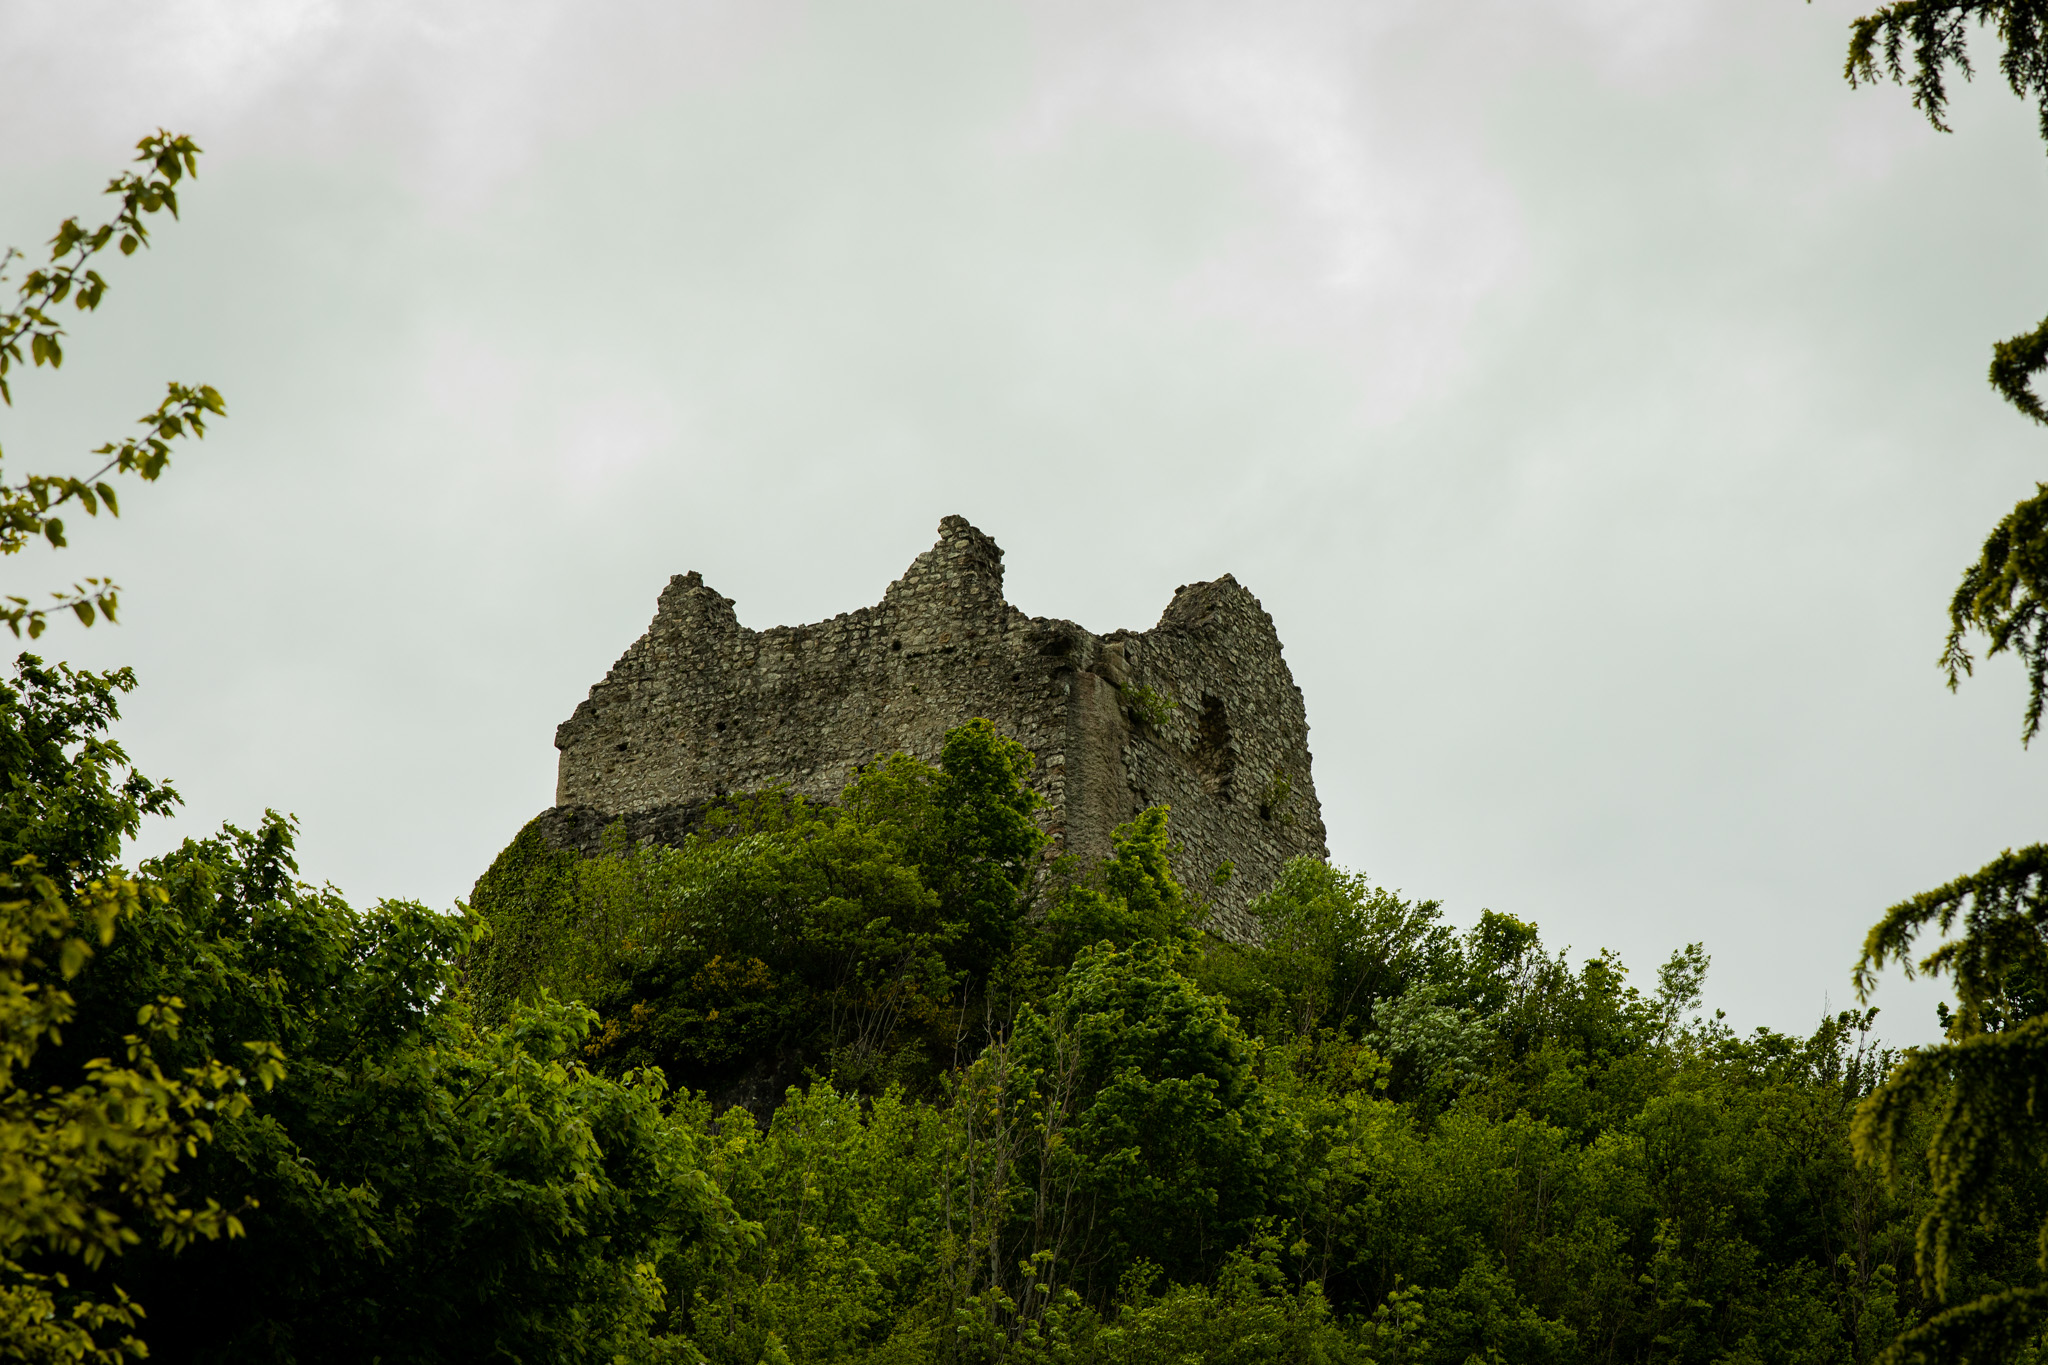 General 2048x1365 landscape trees nature outdoors clouds greenery castle historical relic history ruins photography